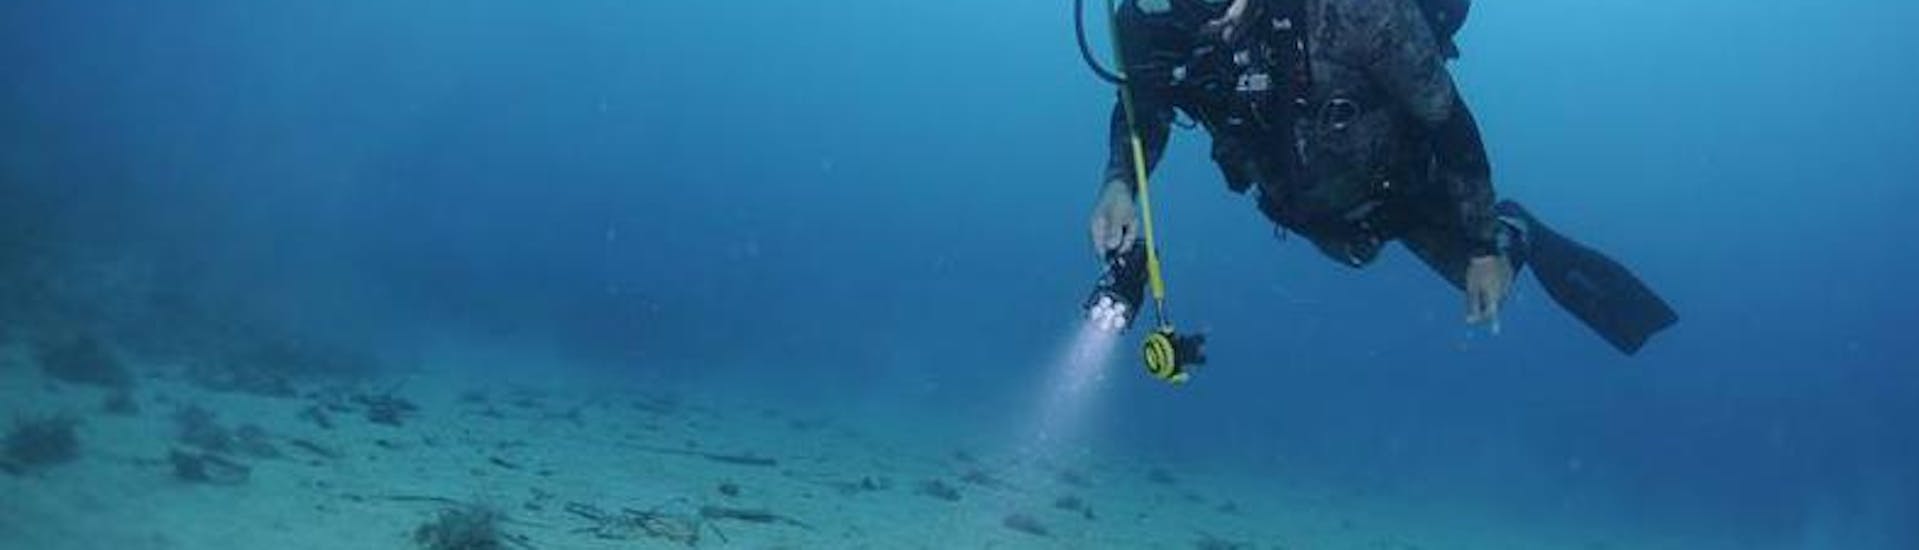 A diver from the diving school Sub Sea Son during a dive near the seabed in Mali Lošinj.